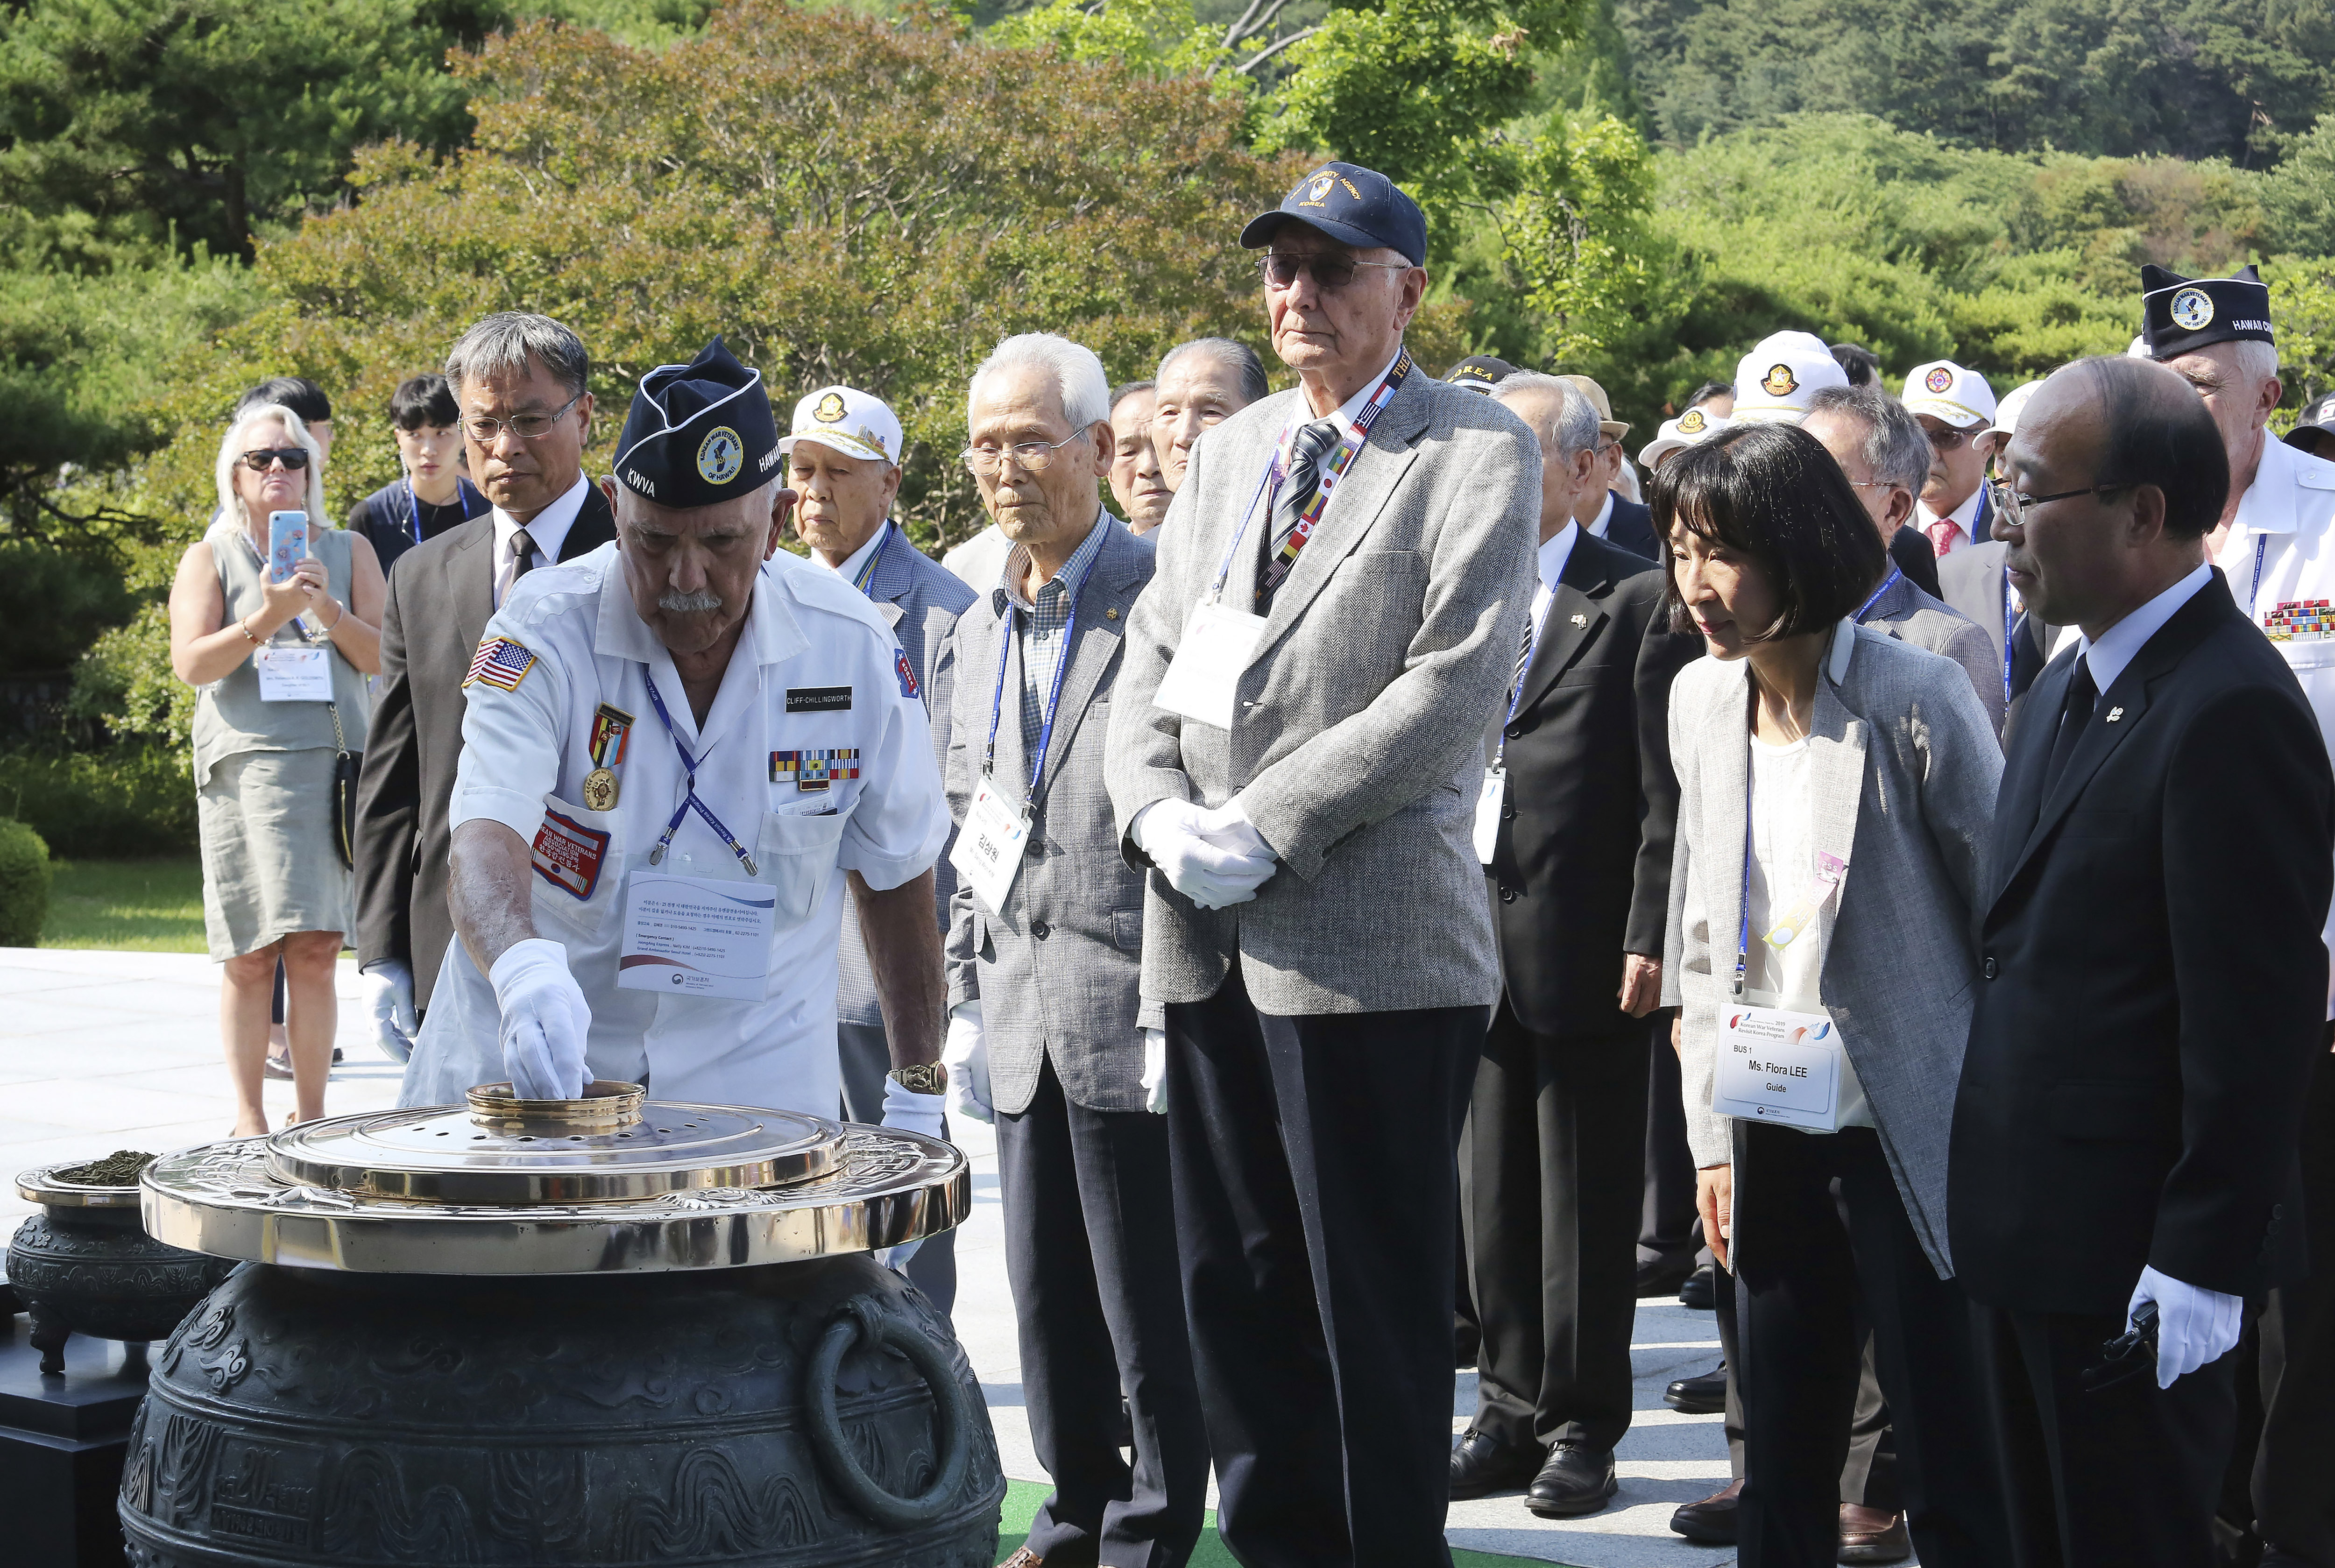 U.S. veteran Clifford K. Chillingworth from Hawaii burns incense on the eve of the 69th anniversary of the outbreak of the Korean War at the National Cemetery in Seoul, South Korea, Monday, June 24, 2019. 62 U.S. war veterans and their families, along with 20 Korean veterans and their families residing overseas, arrived on Sunday, June 23 for a six-day visit to mark the anniversary. (AP Photo/Ahn Young-joon)